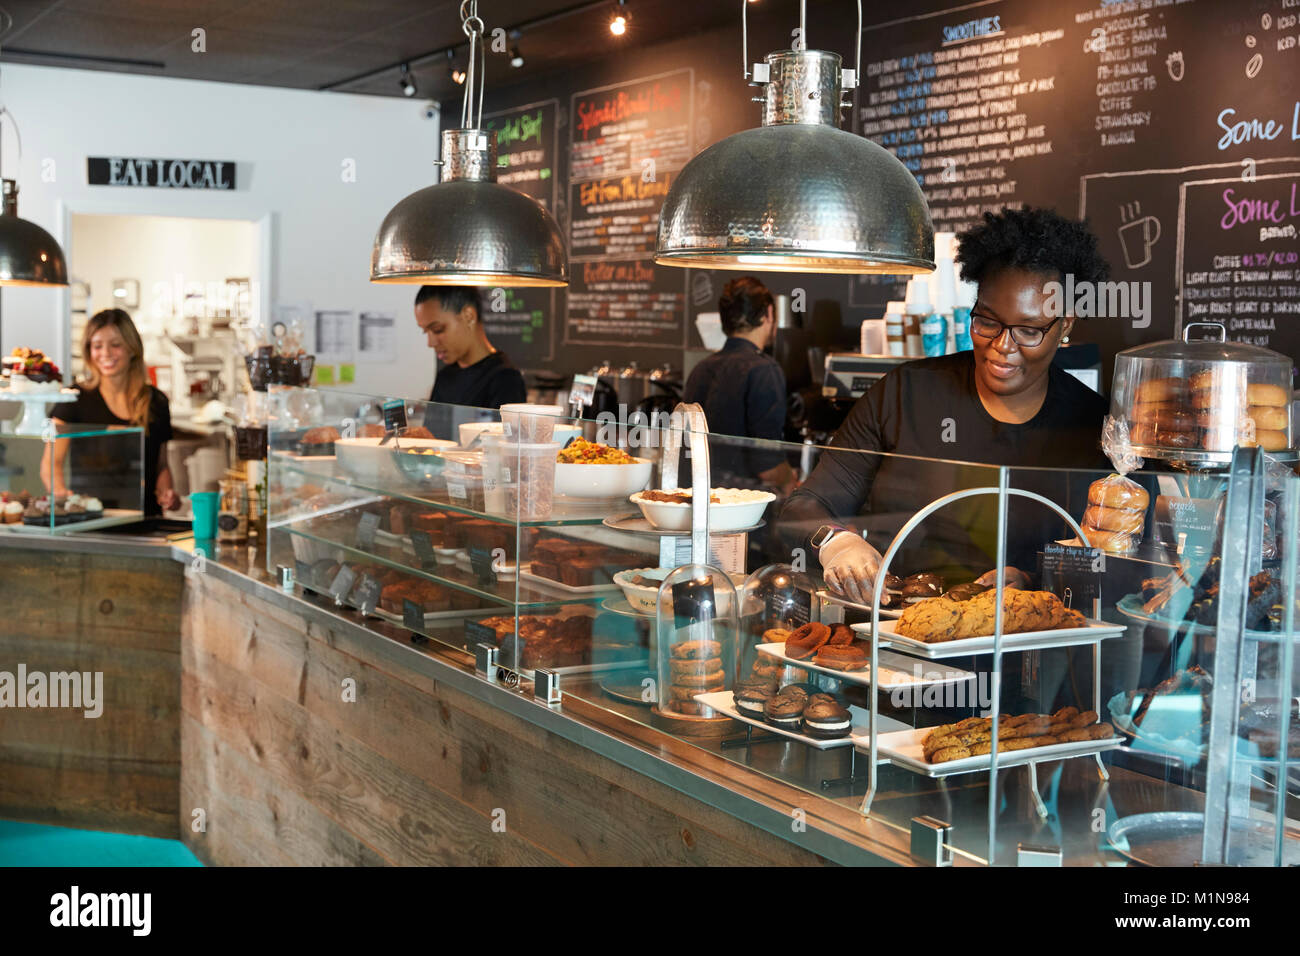 Staff Working Behind Counter In Busy Coffee Shop Stock Photo